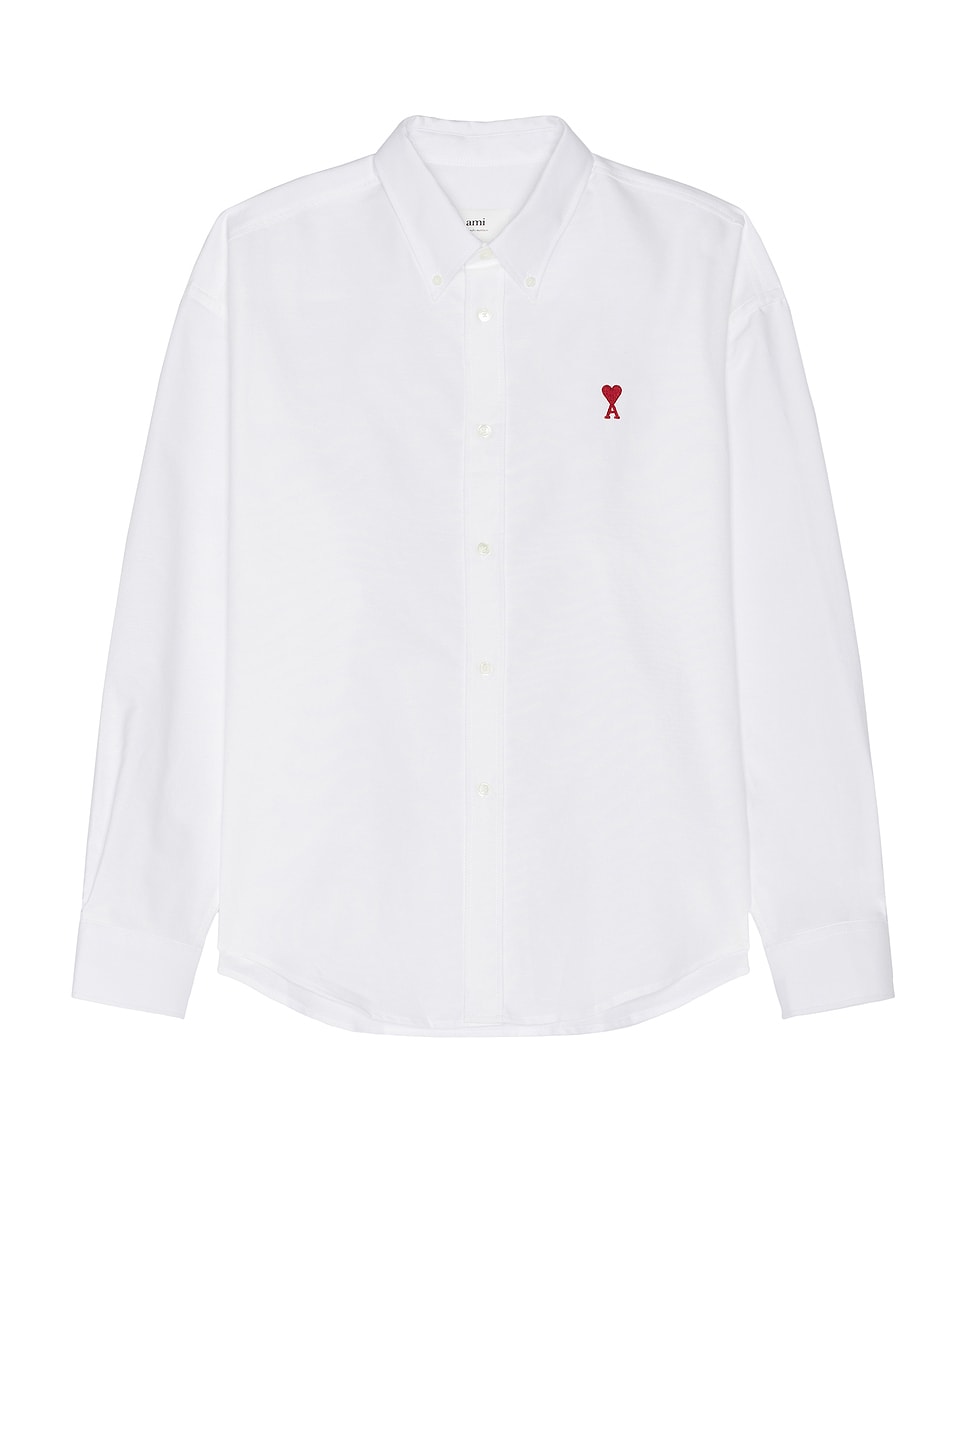 Image 1 of ami Boxy Fit Shirt in Natural White